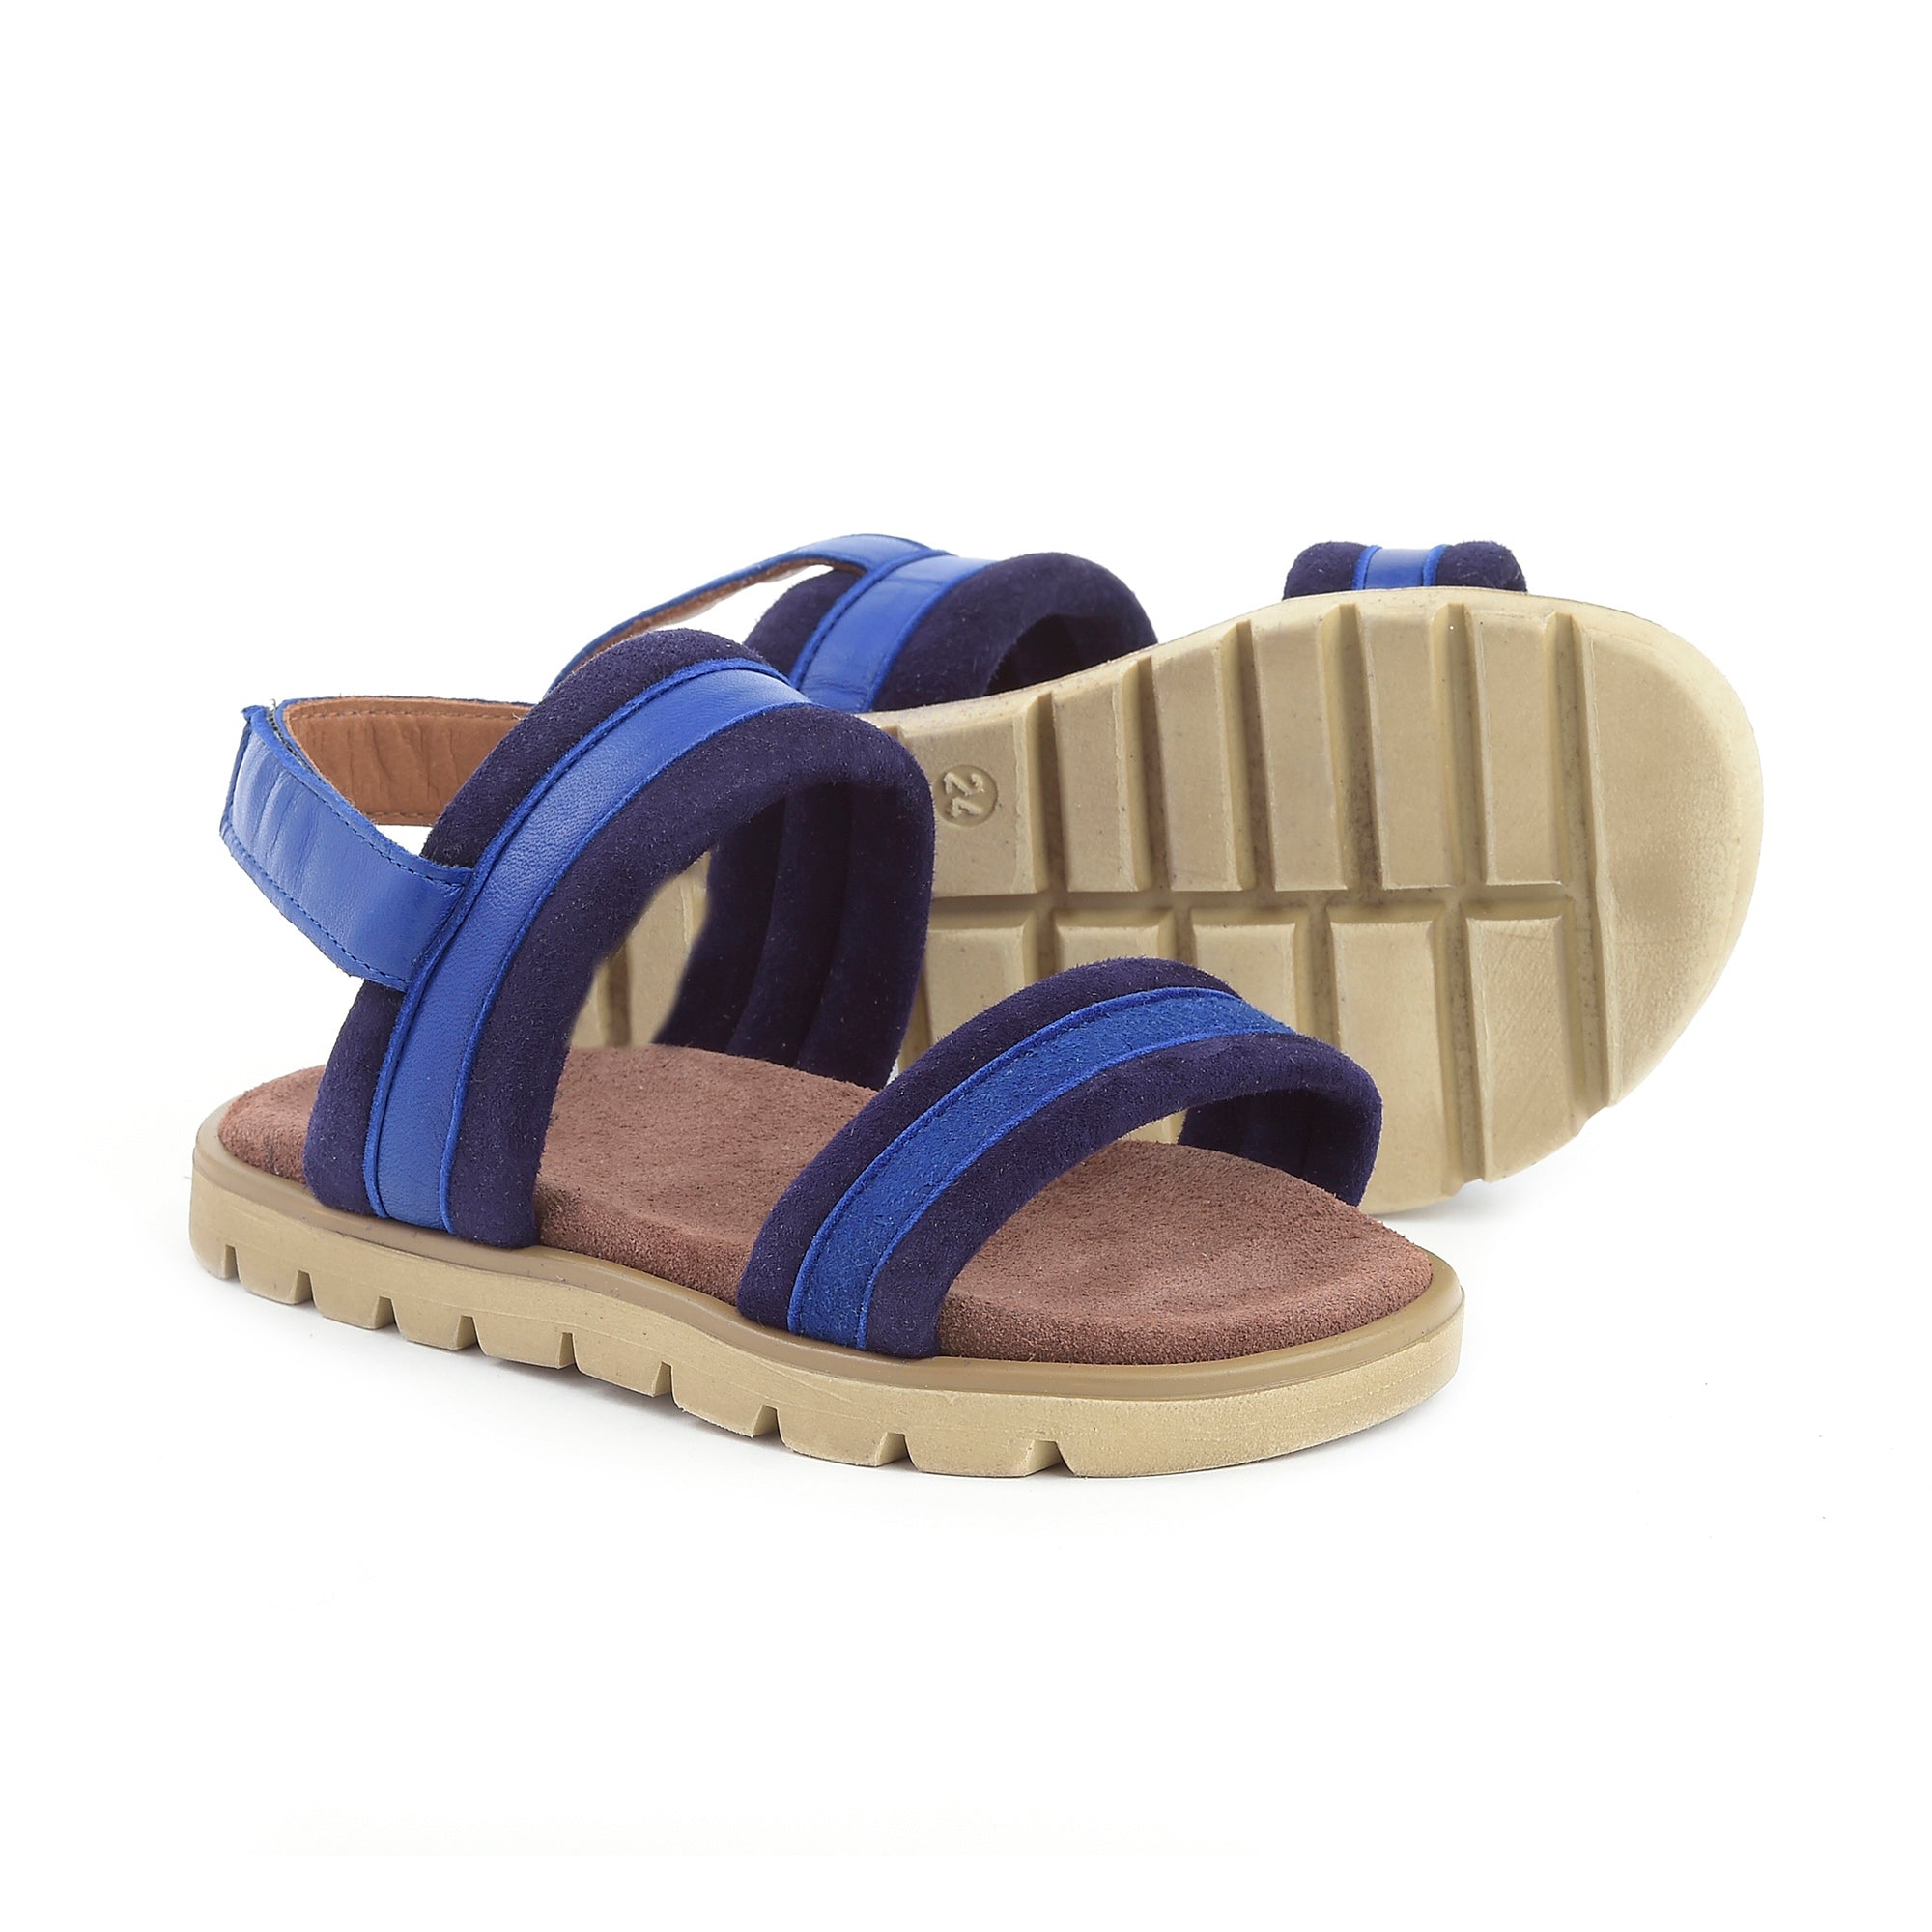 Girls Blue Leather Sandals